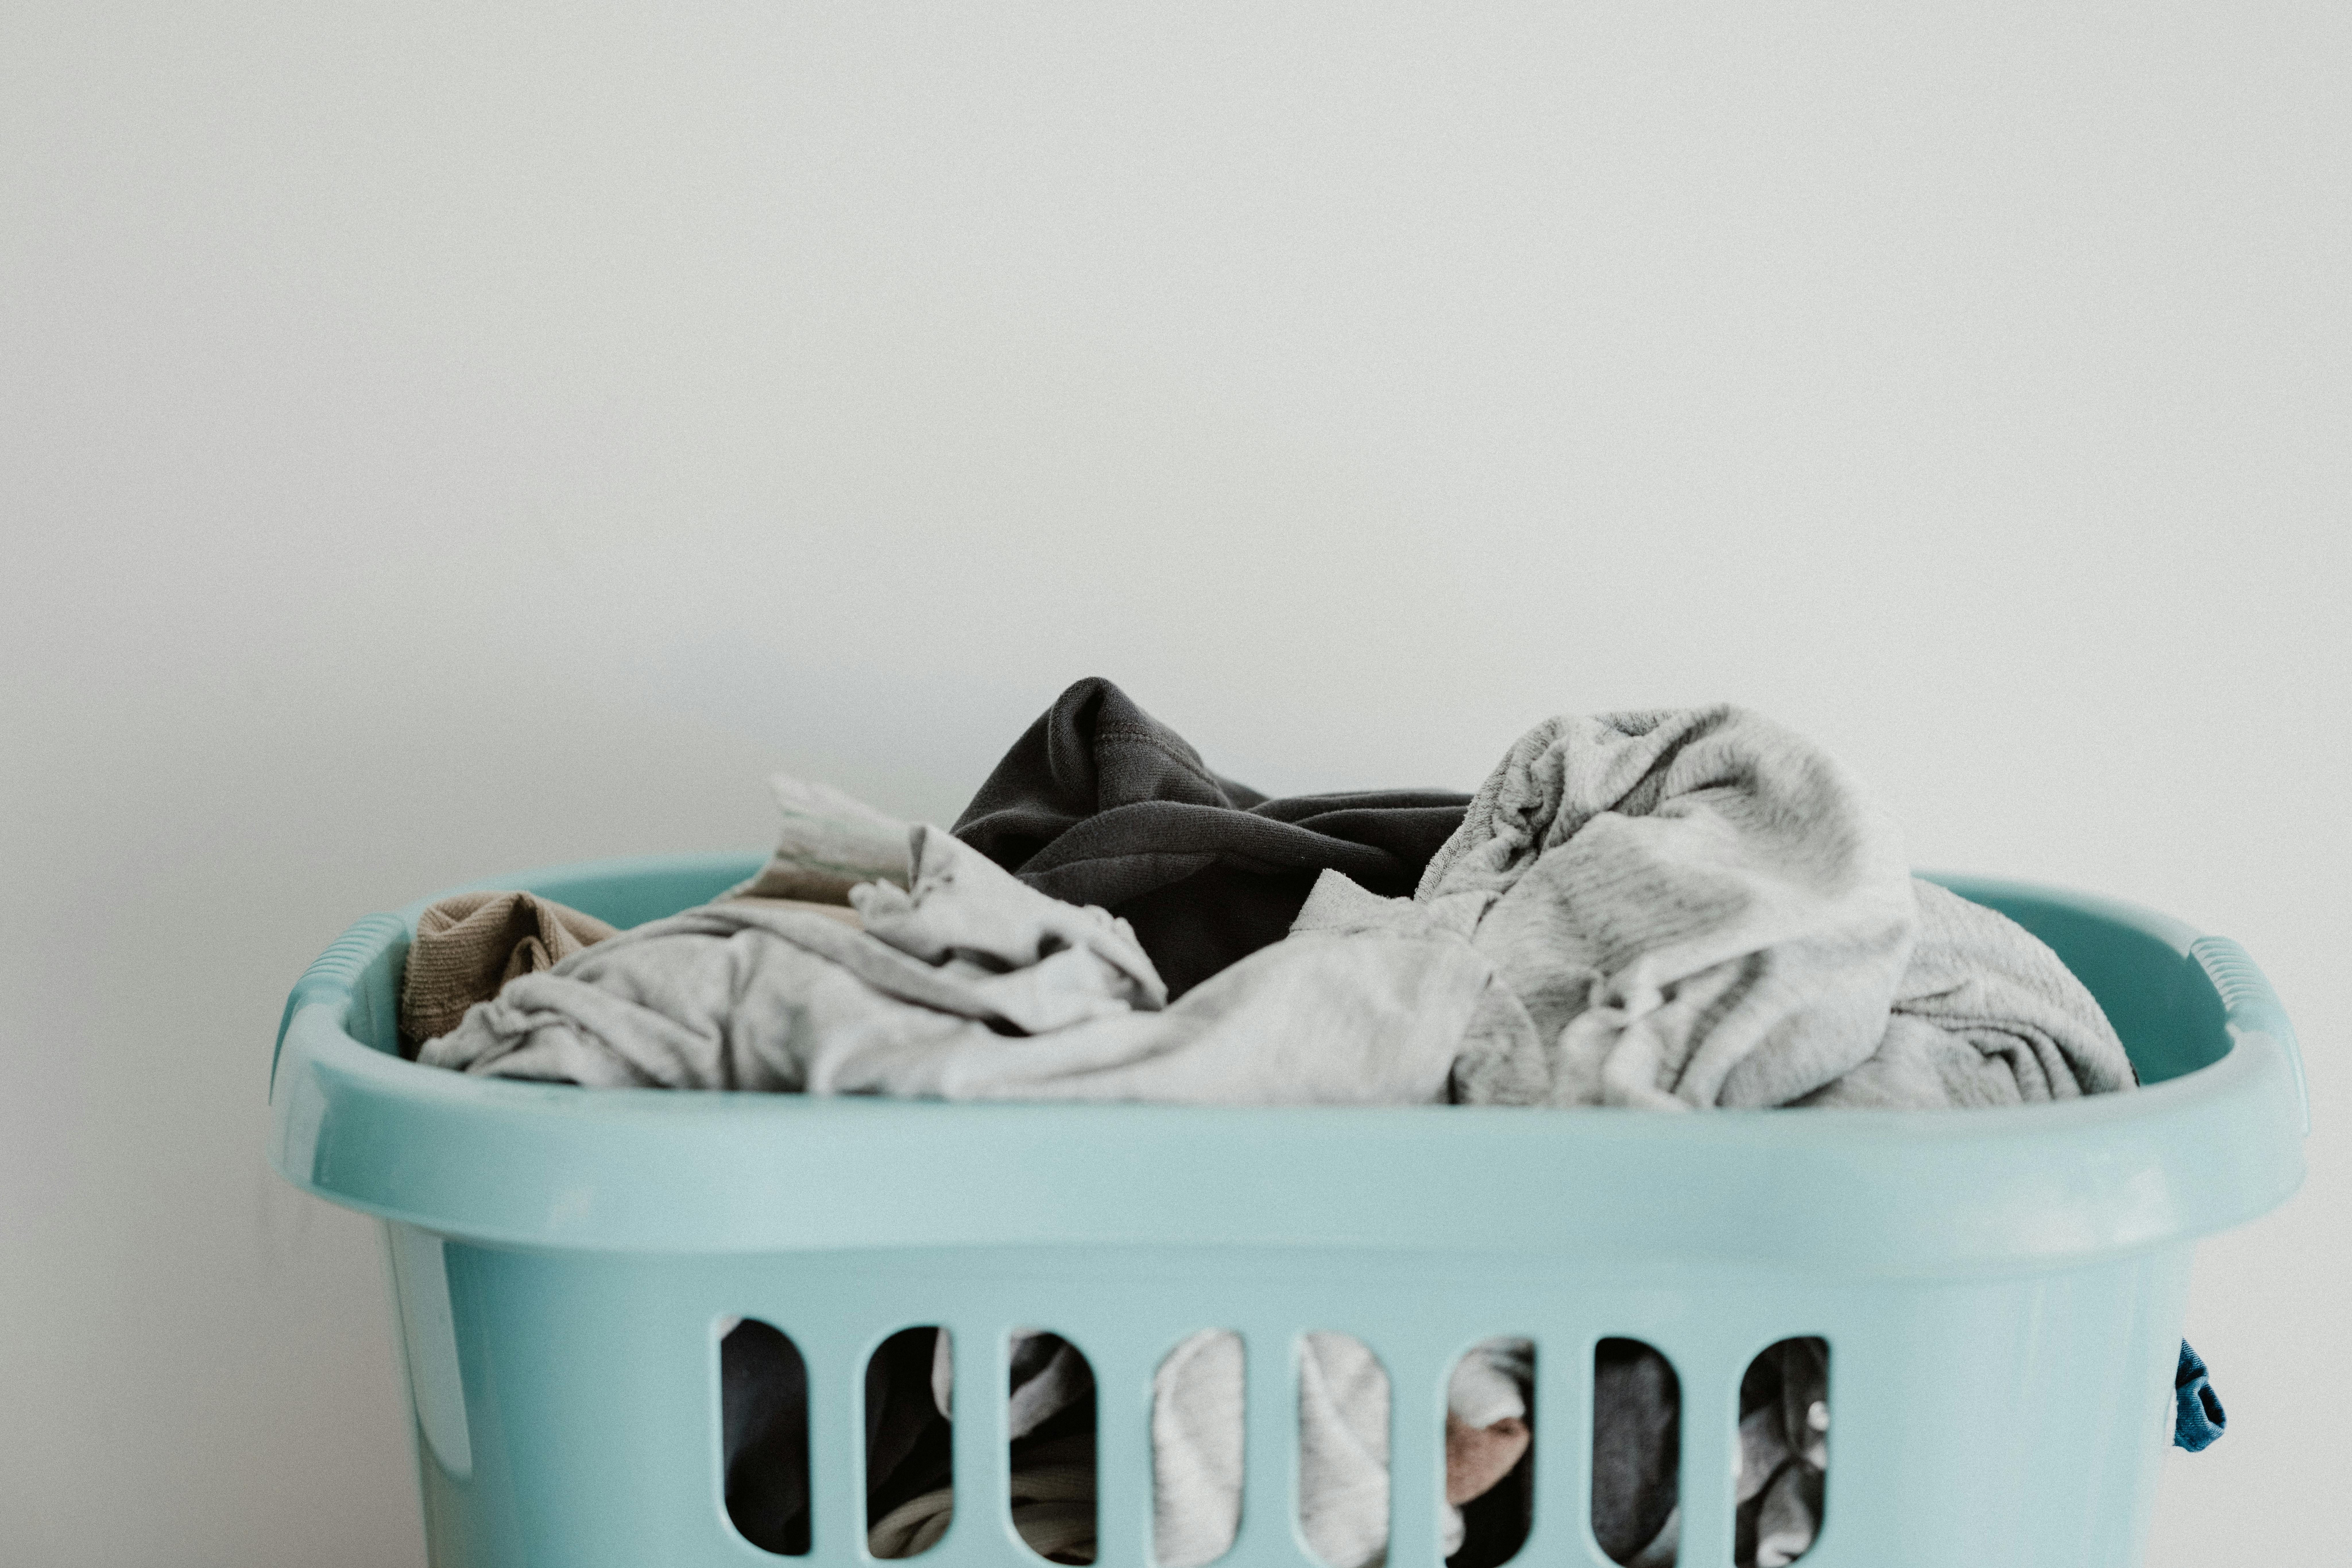 laundry in a laundry basket